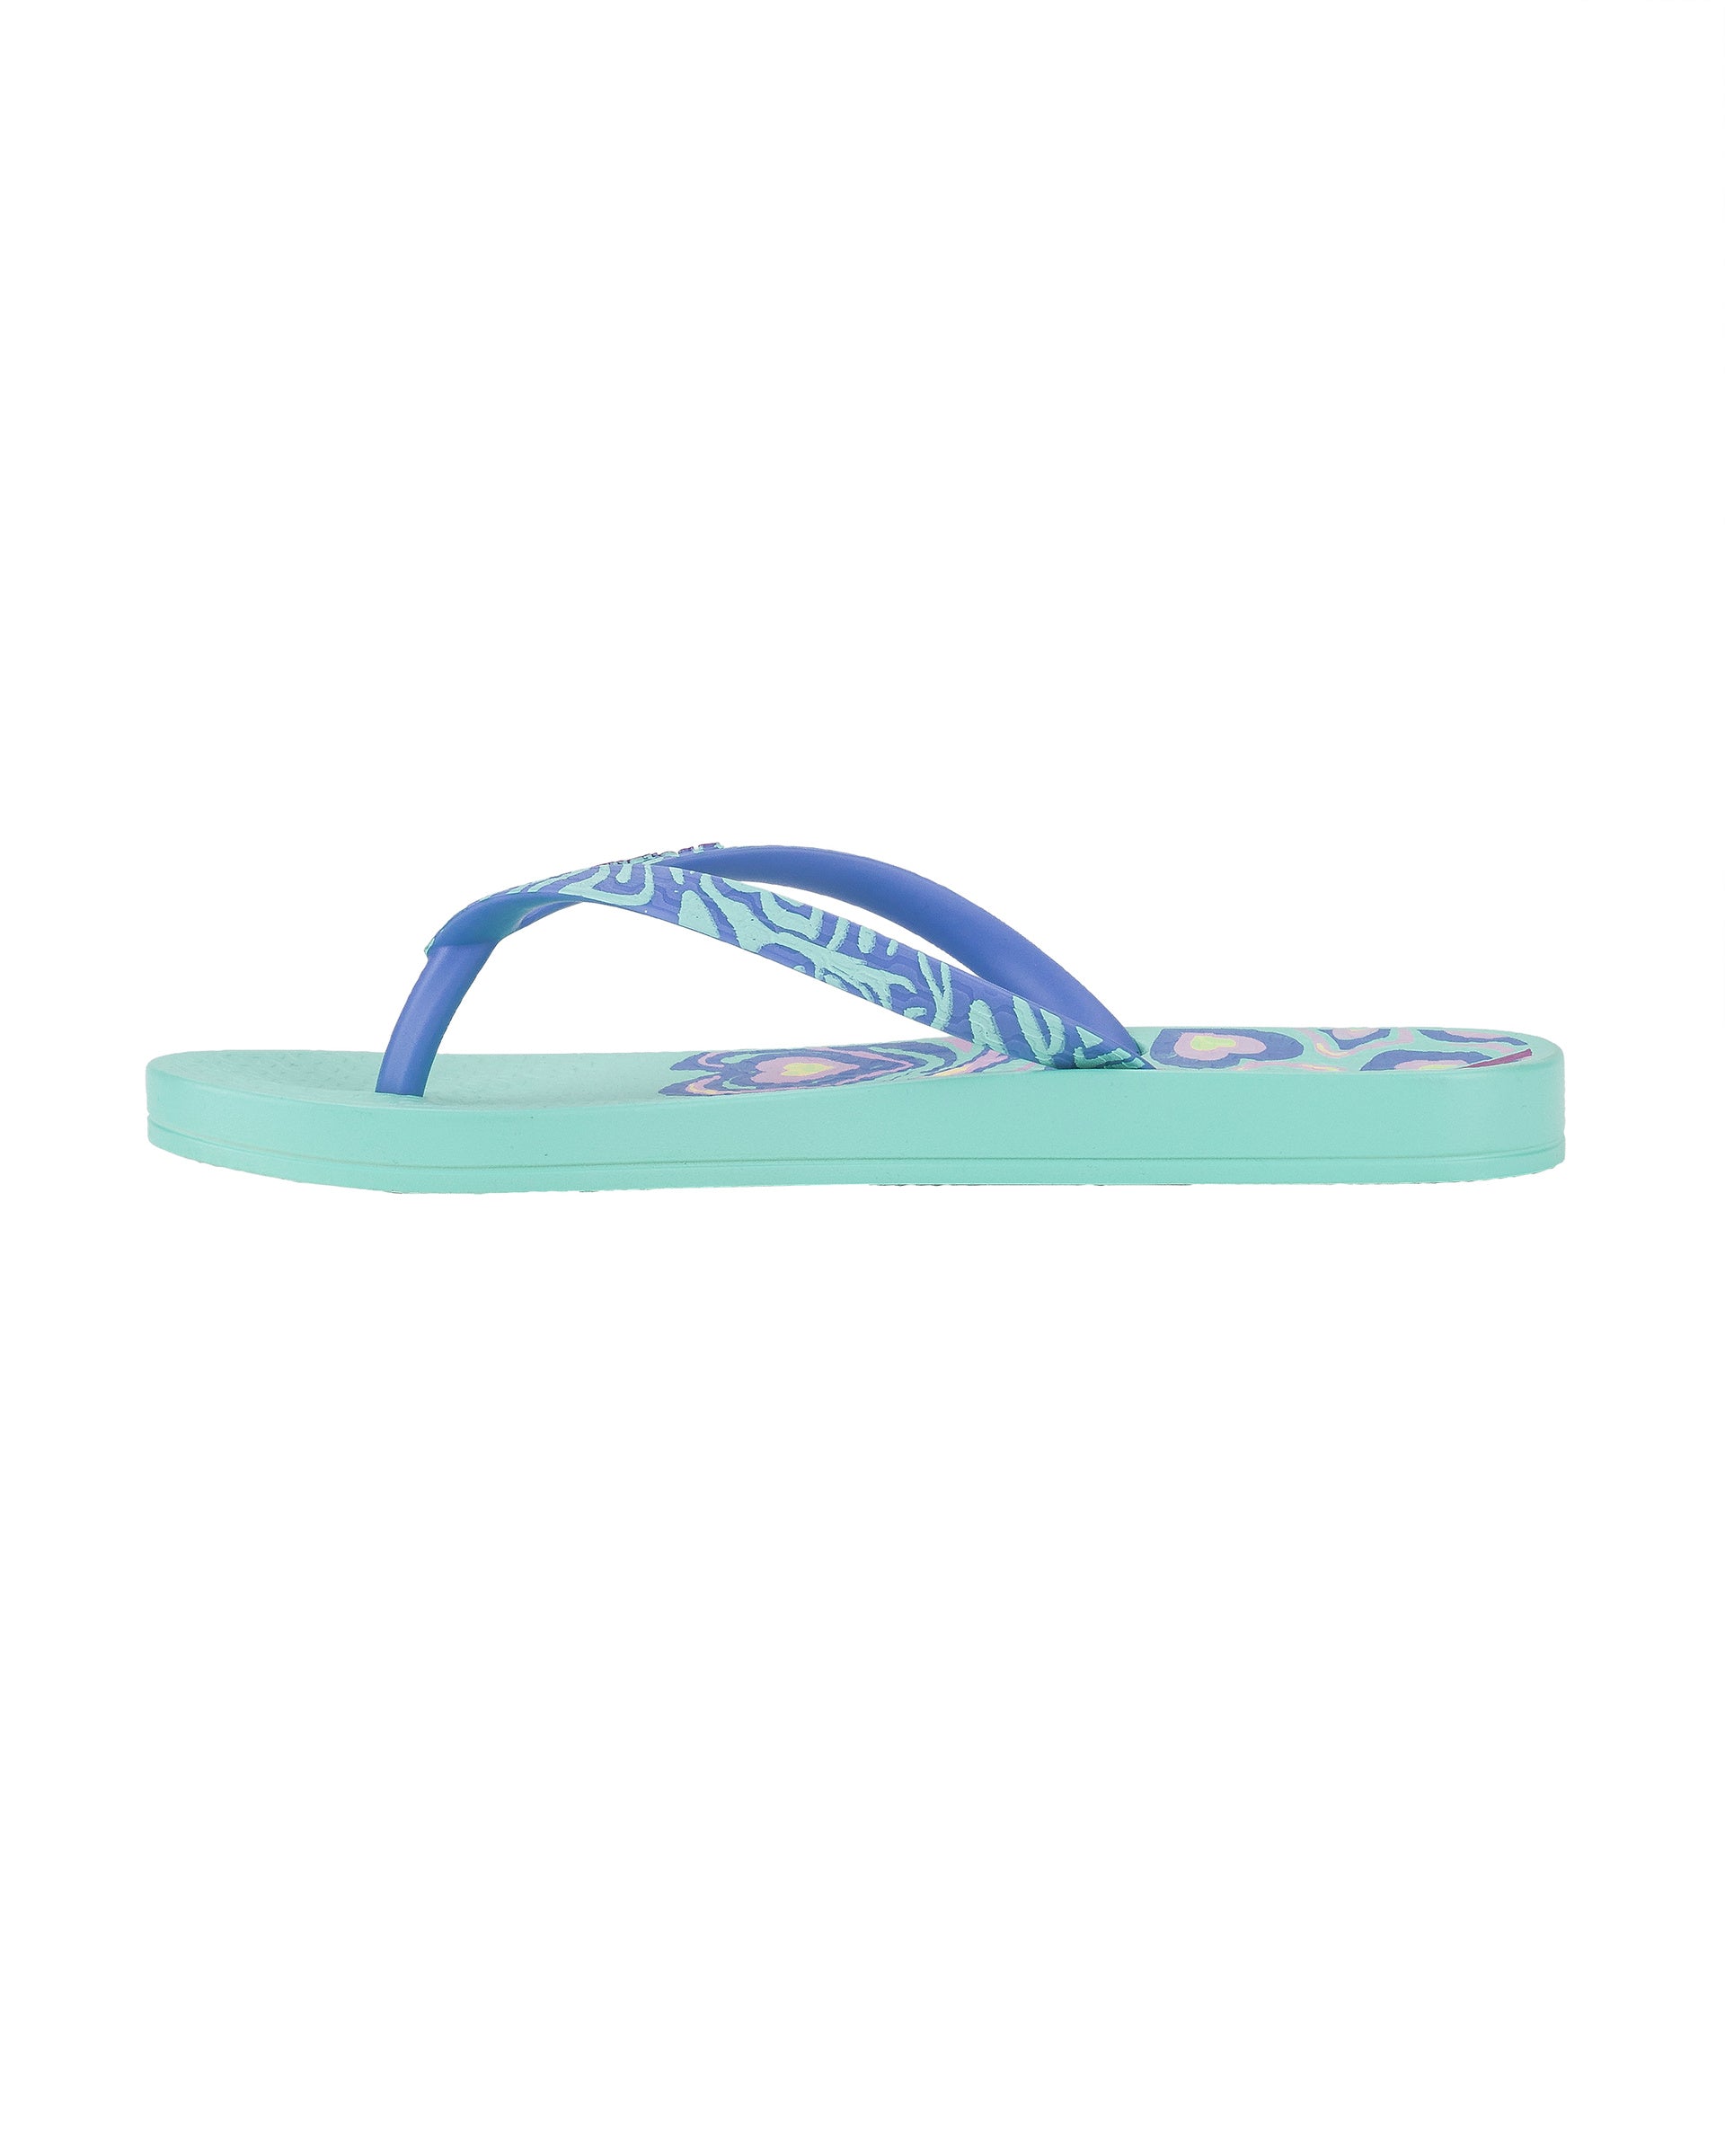 Inner side view of a green Ipanema Nostalgic Hearts kid's flip flop with heart outlines on insole and blue strap.